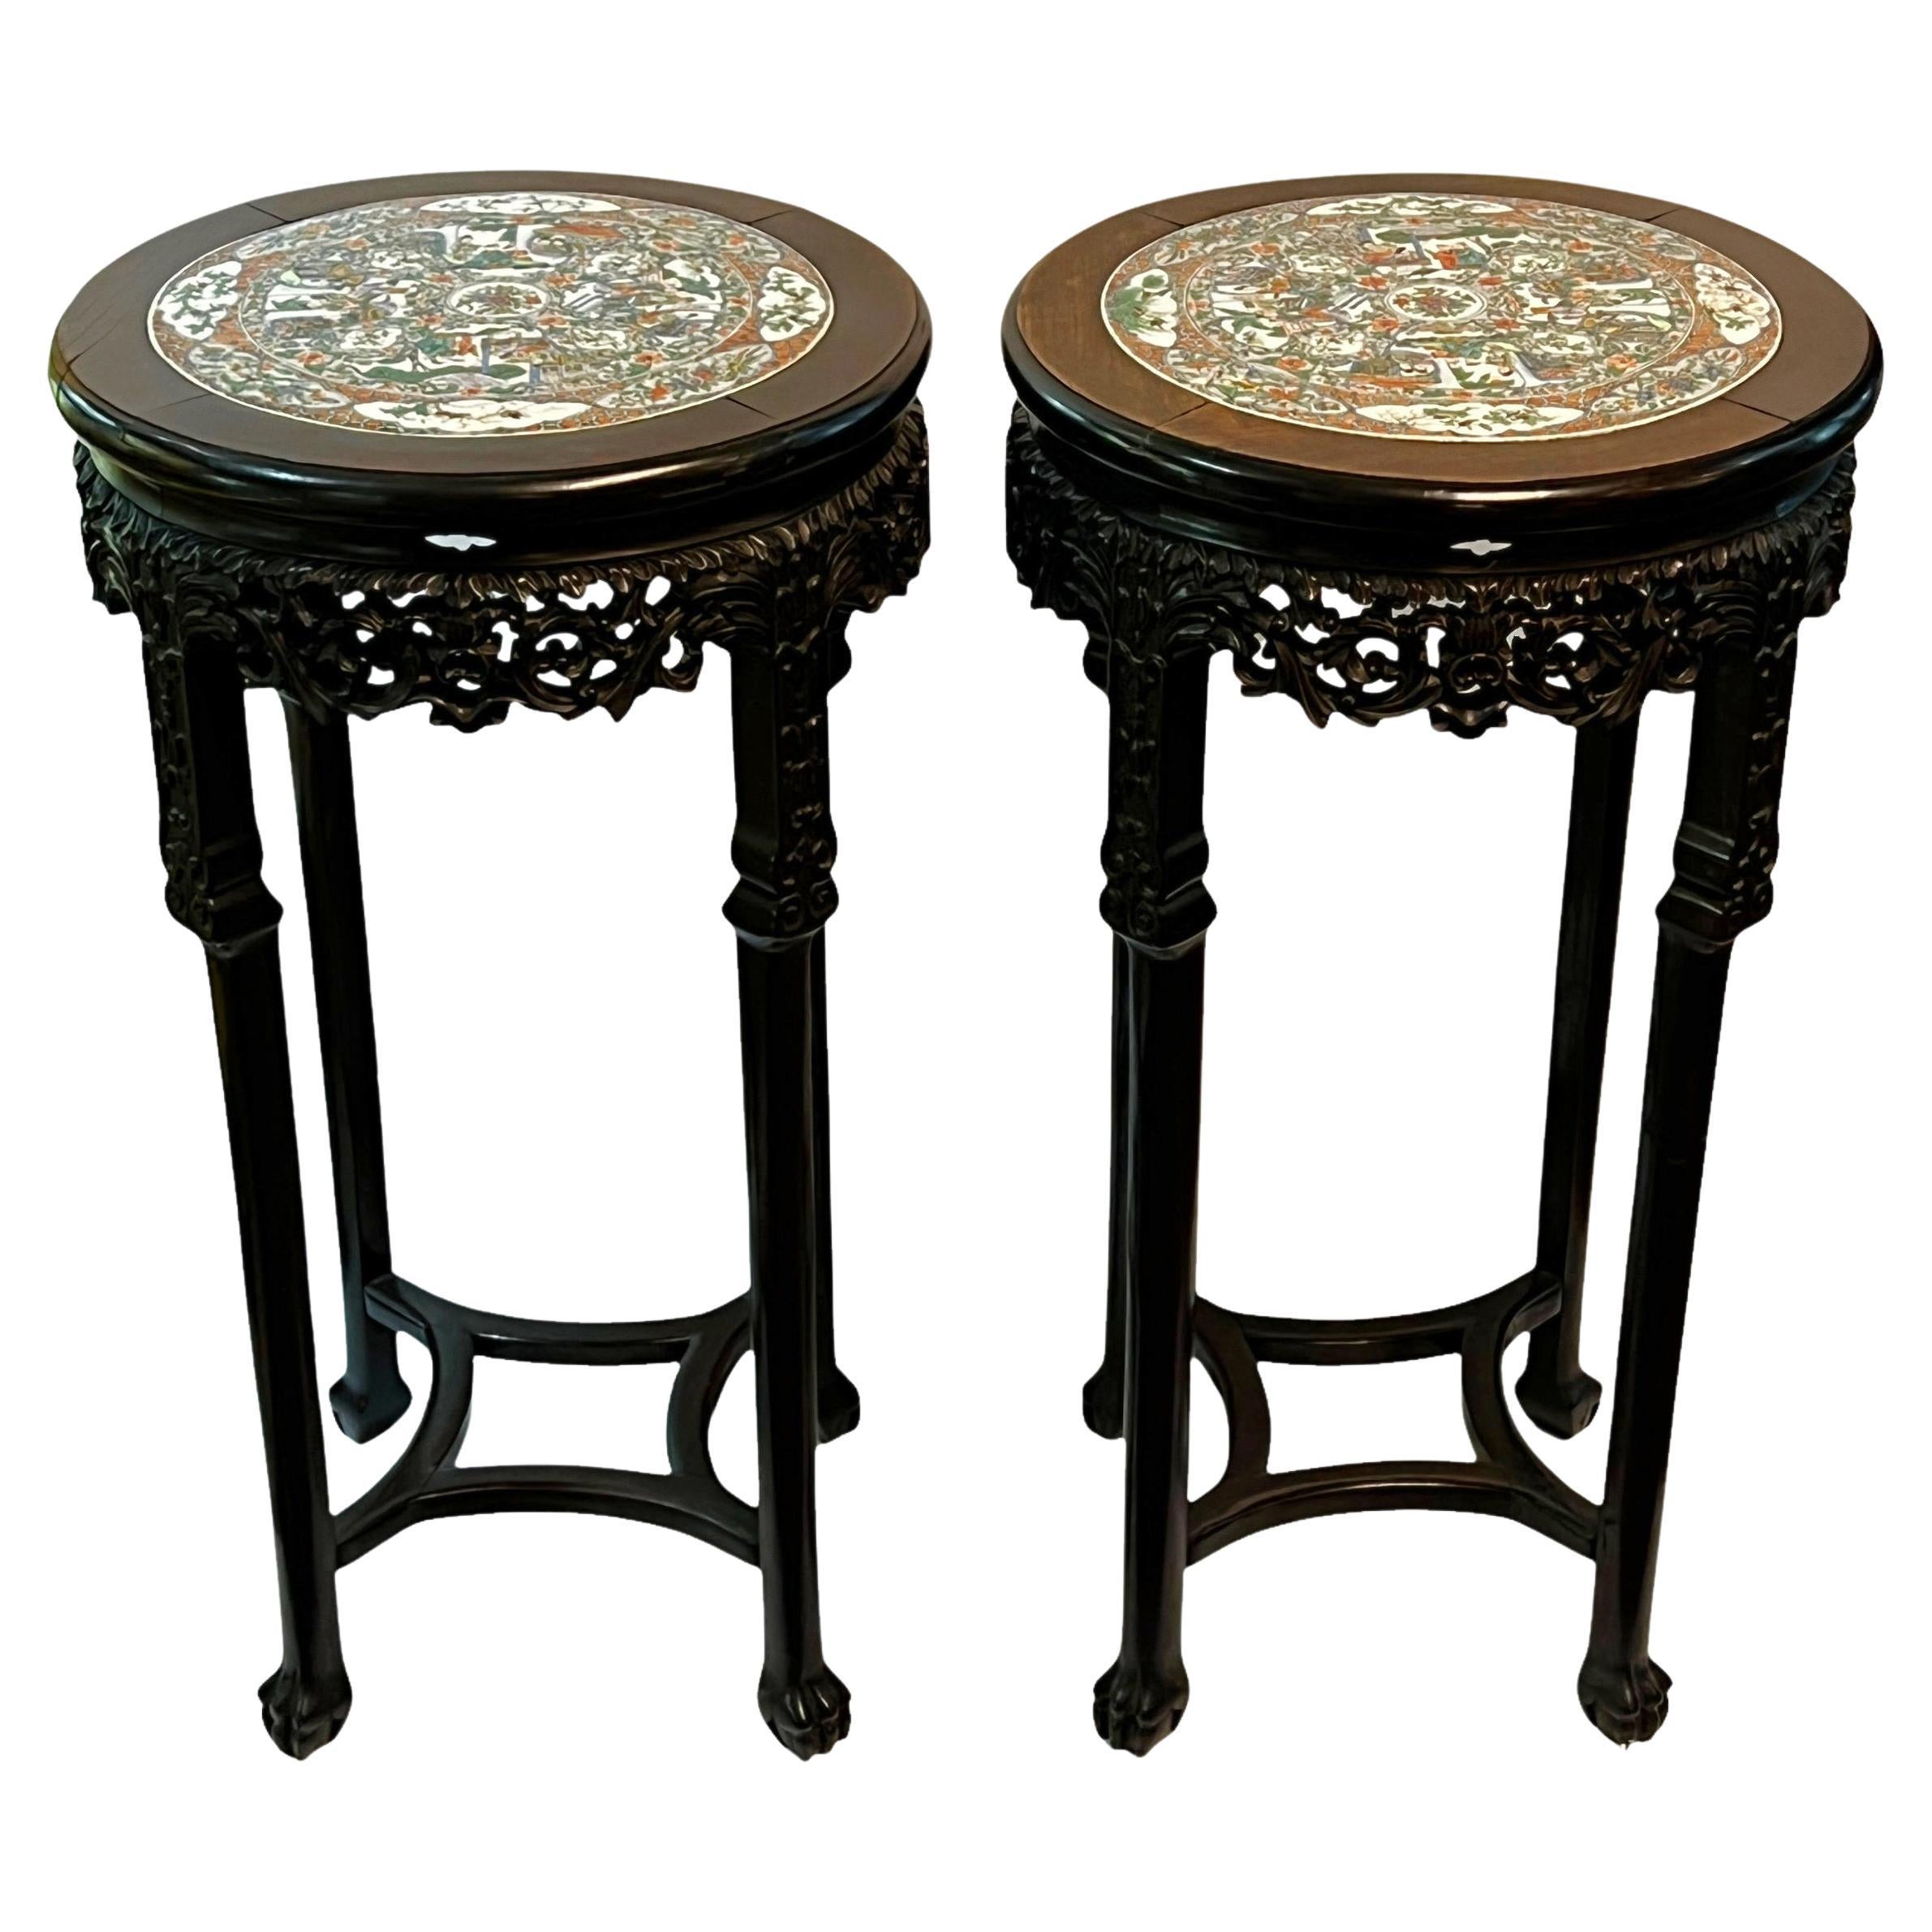 Pair Chinese Rosewood Plant Stands with Famille Verte Porcelain Inserts